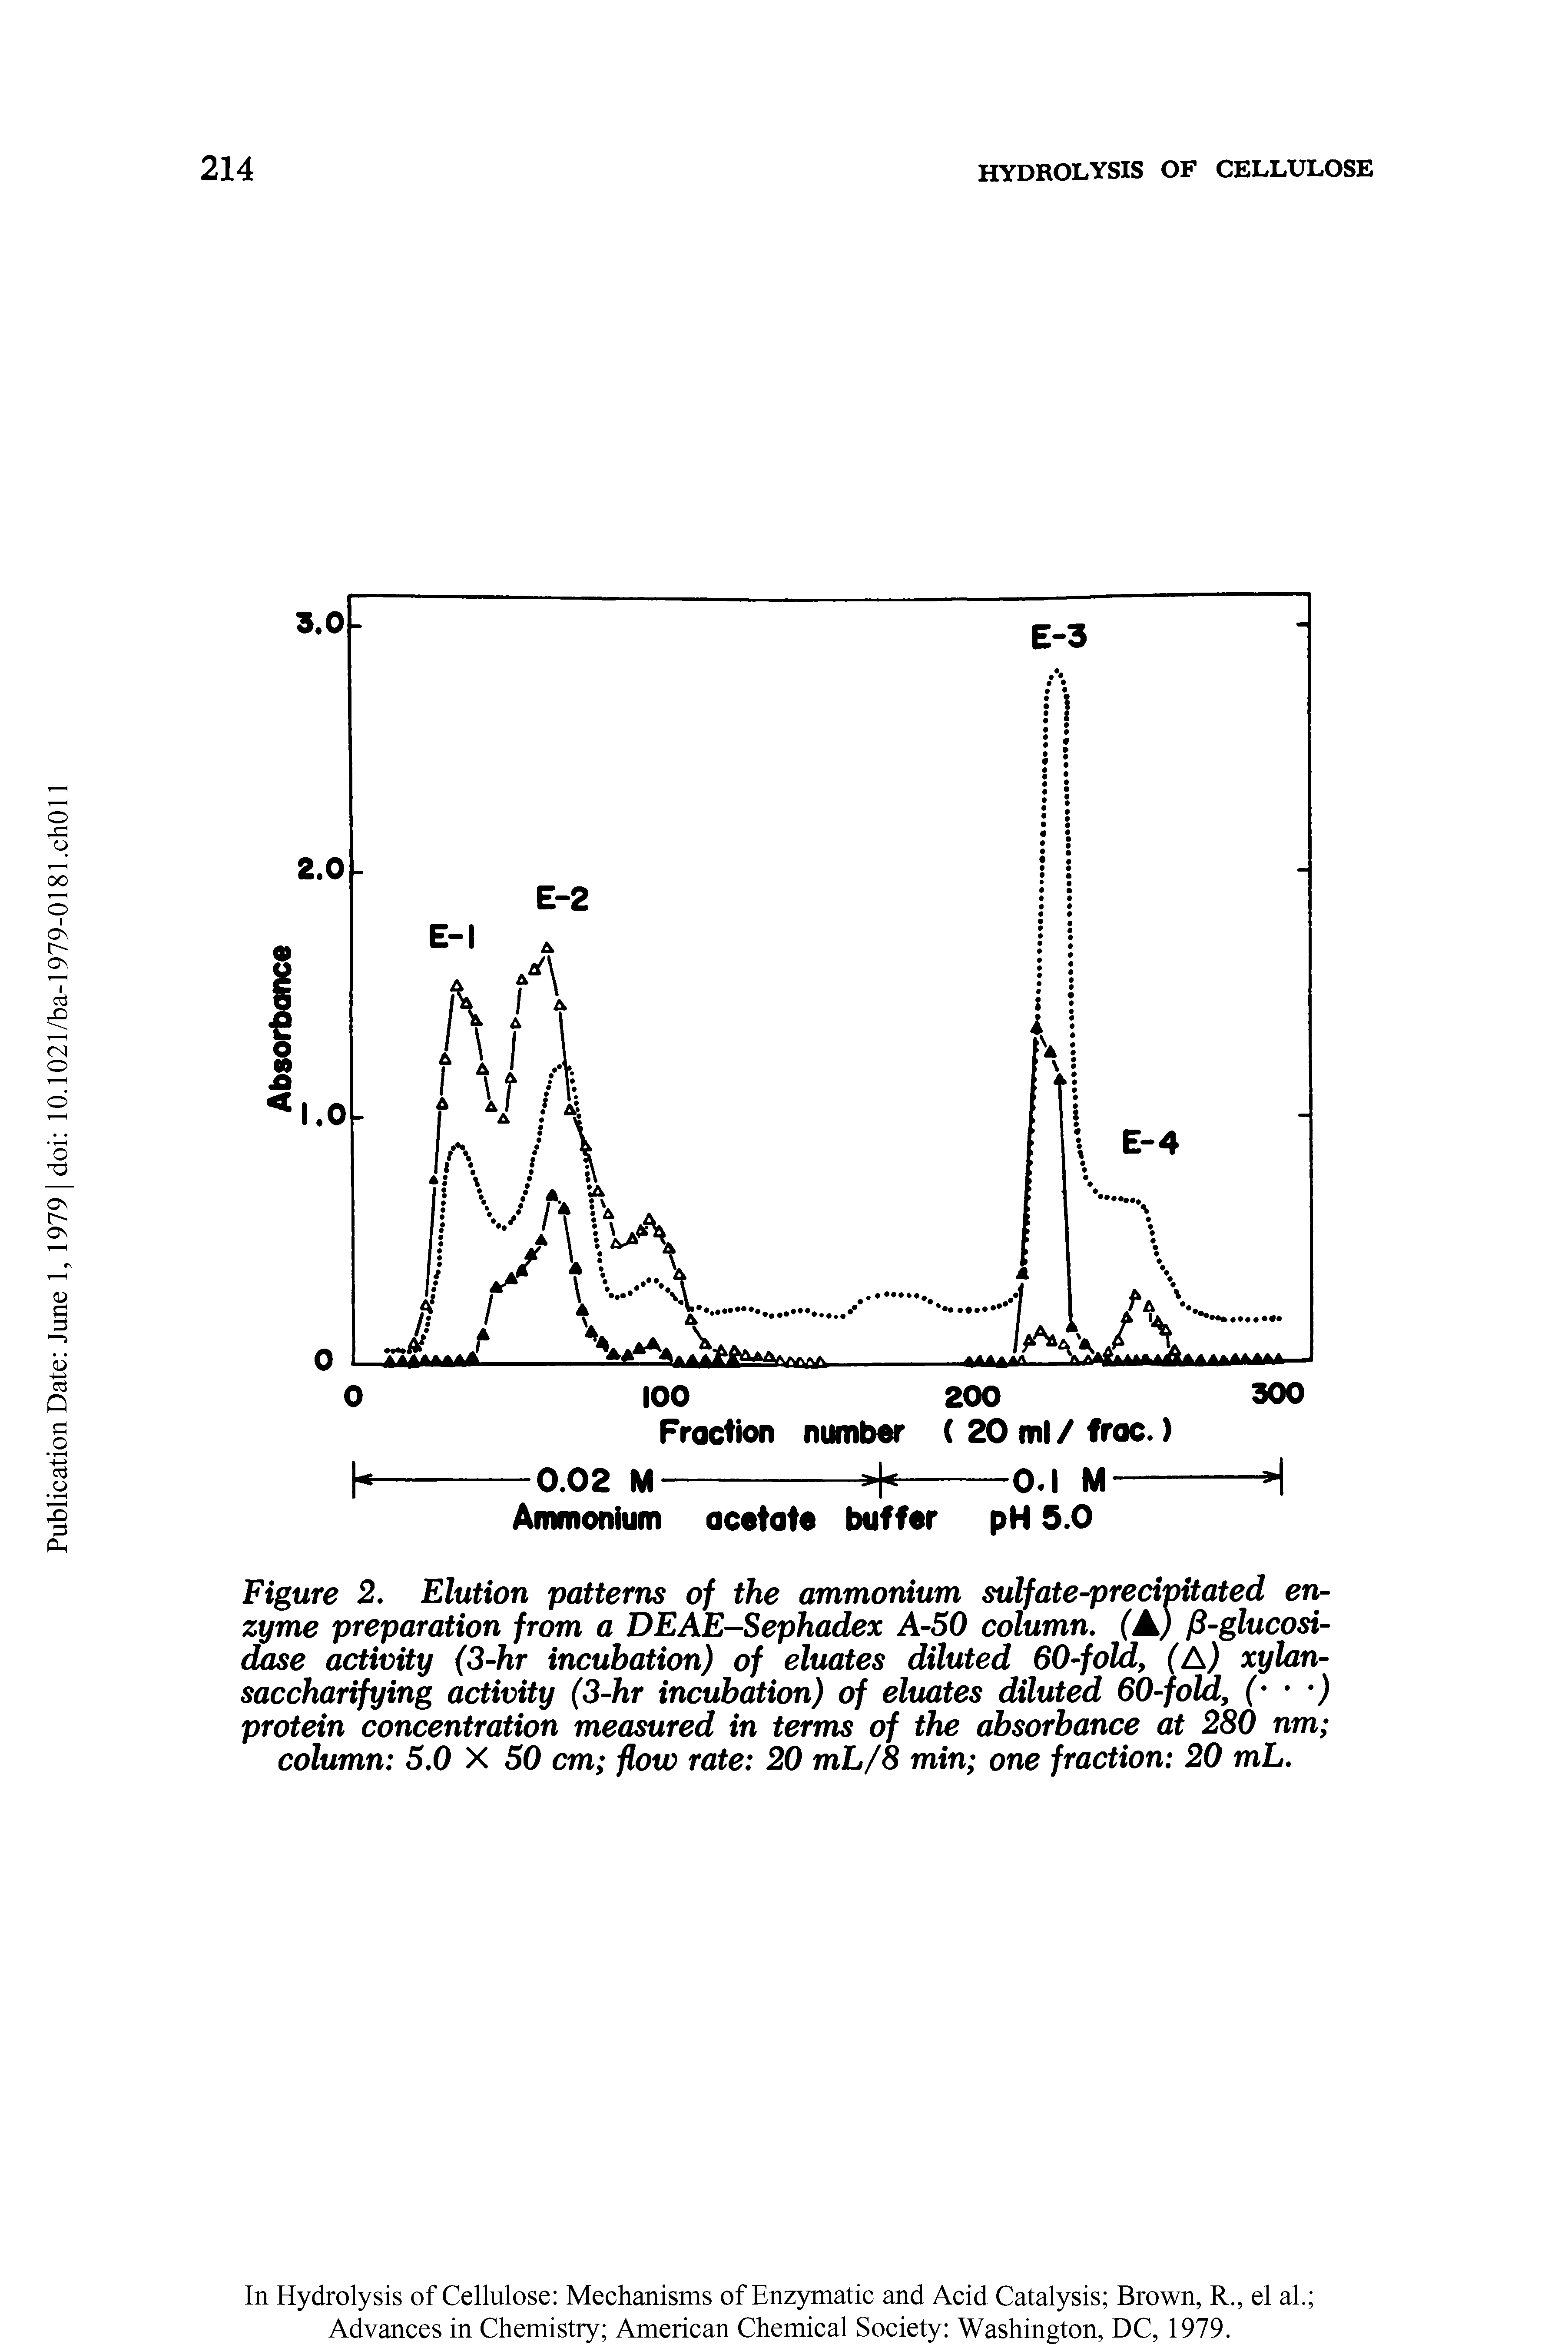 Figure 2. Elution patterns of the ammonium sulfate-precivitated enzyme preparation from a DEAE-Sephadex A-50 column. (A) fi-glucosi-dase activity (3-hr incubation) of eluates diluted 60-fold, (A) xylan-saccharifying activity (3-hr incubation) of eluates diluted 60-fold, ( ) protein concentration measured in terms of the absorbance at 280 nm column 5.0 X 50 cm flow rate 20 mL/8 min one fraction 20 mL.